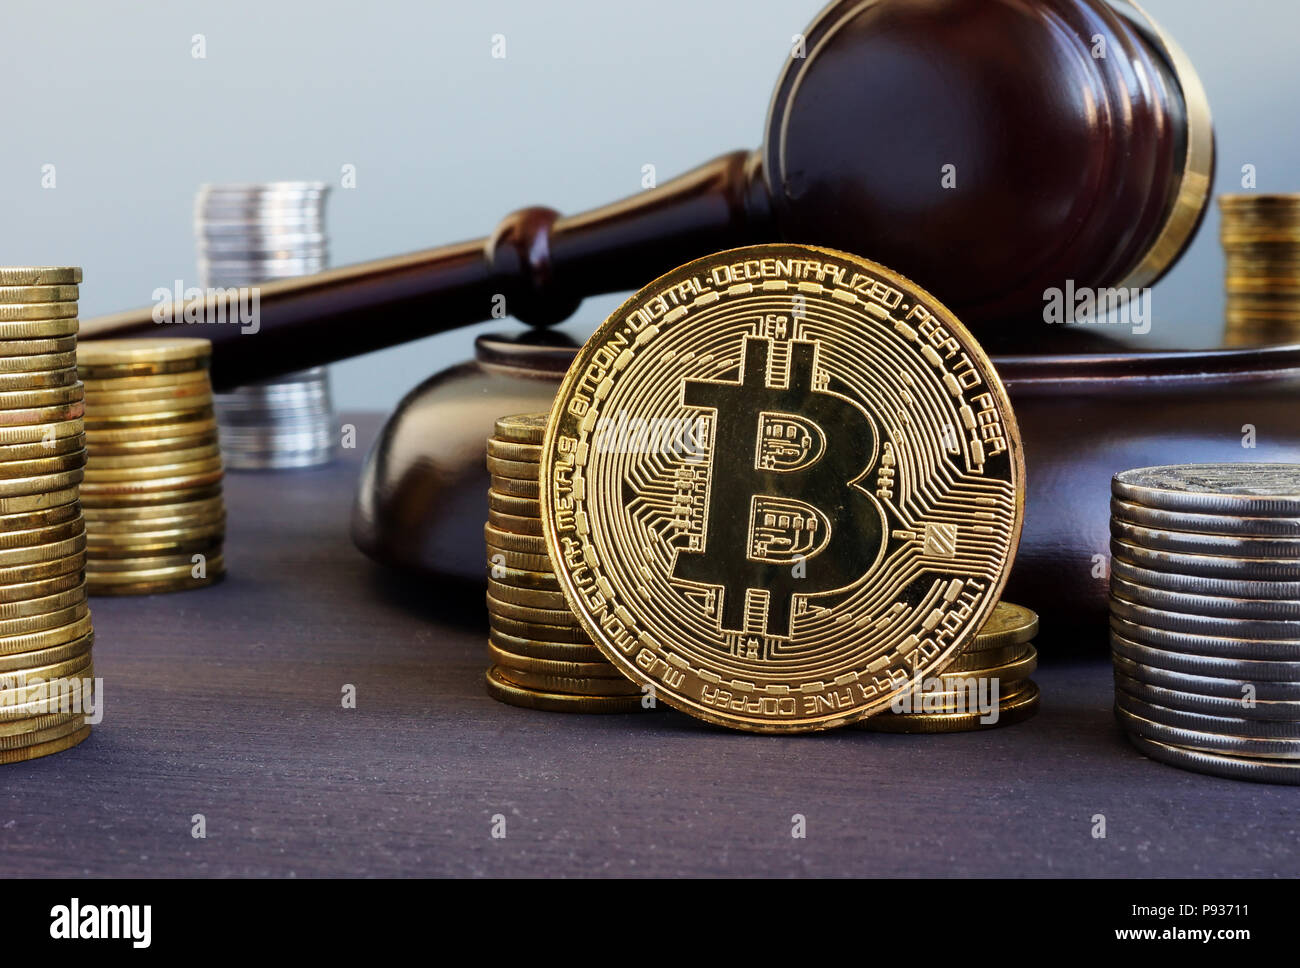 Cryptocurrency regulation. Bitcoin and gavel on a desk. Stock Photo